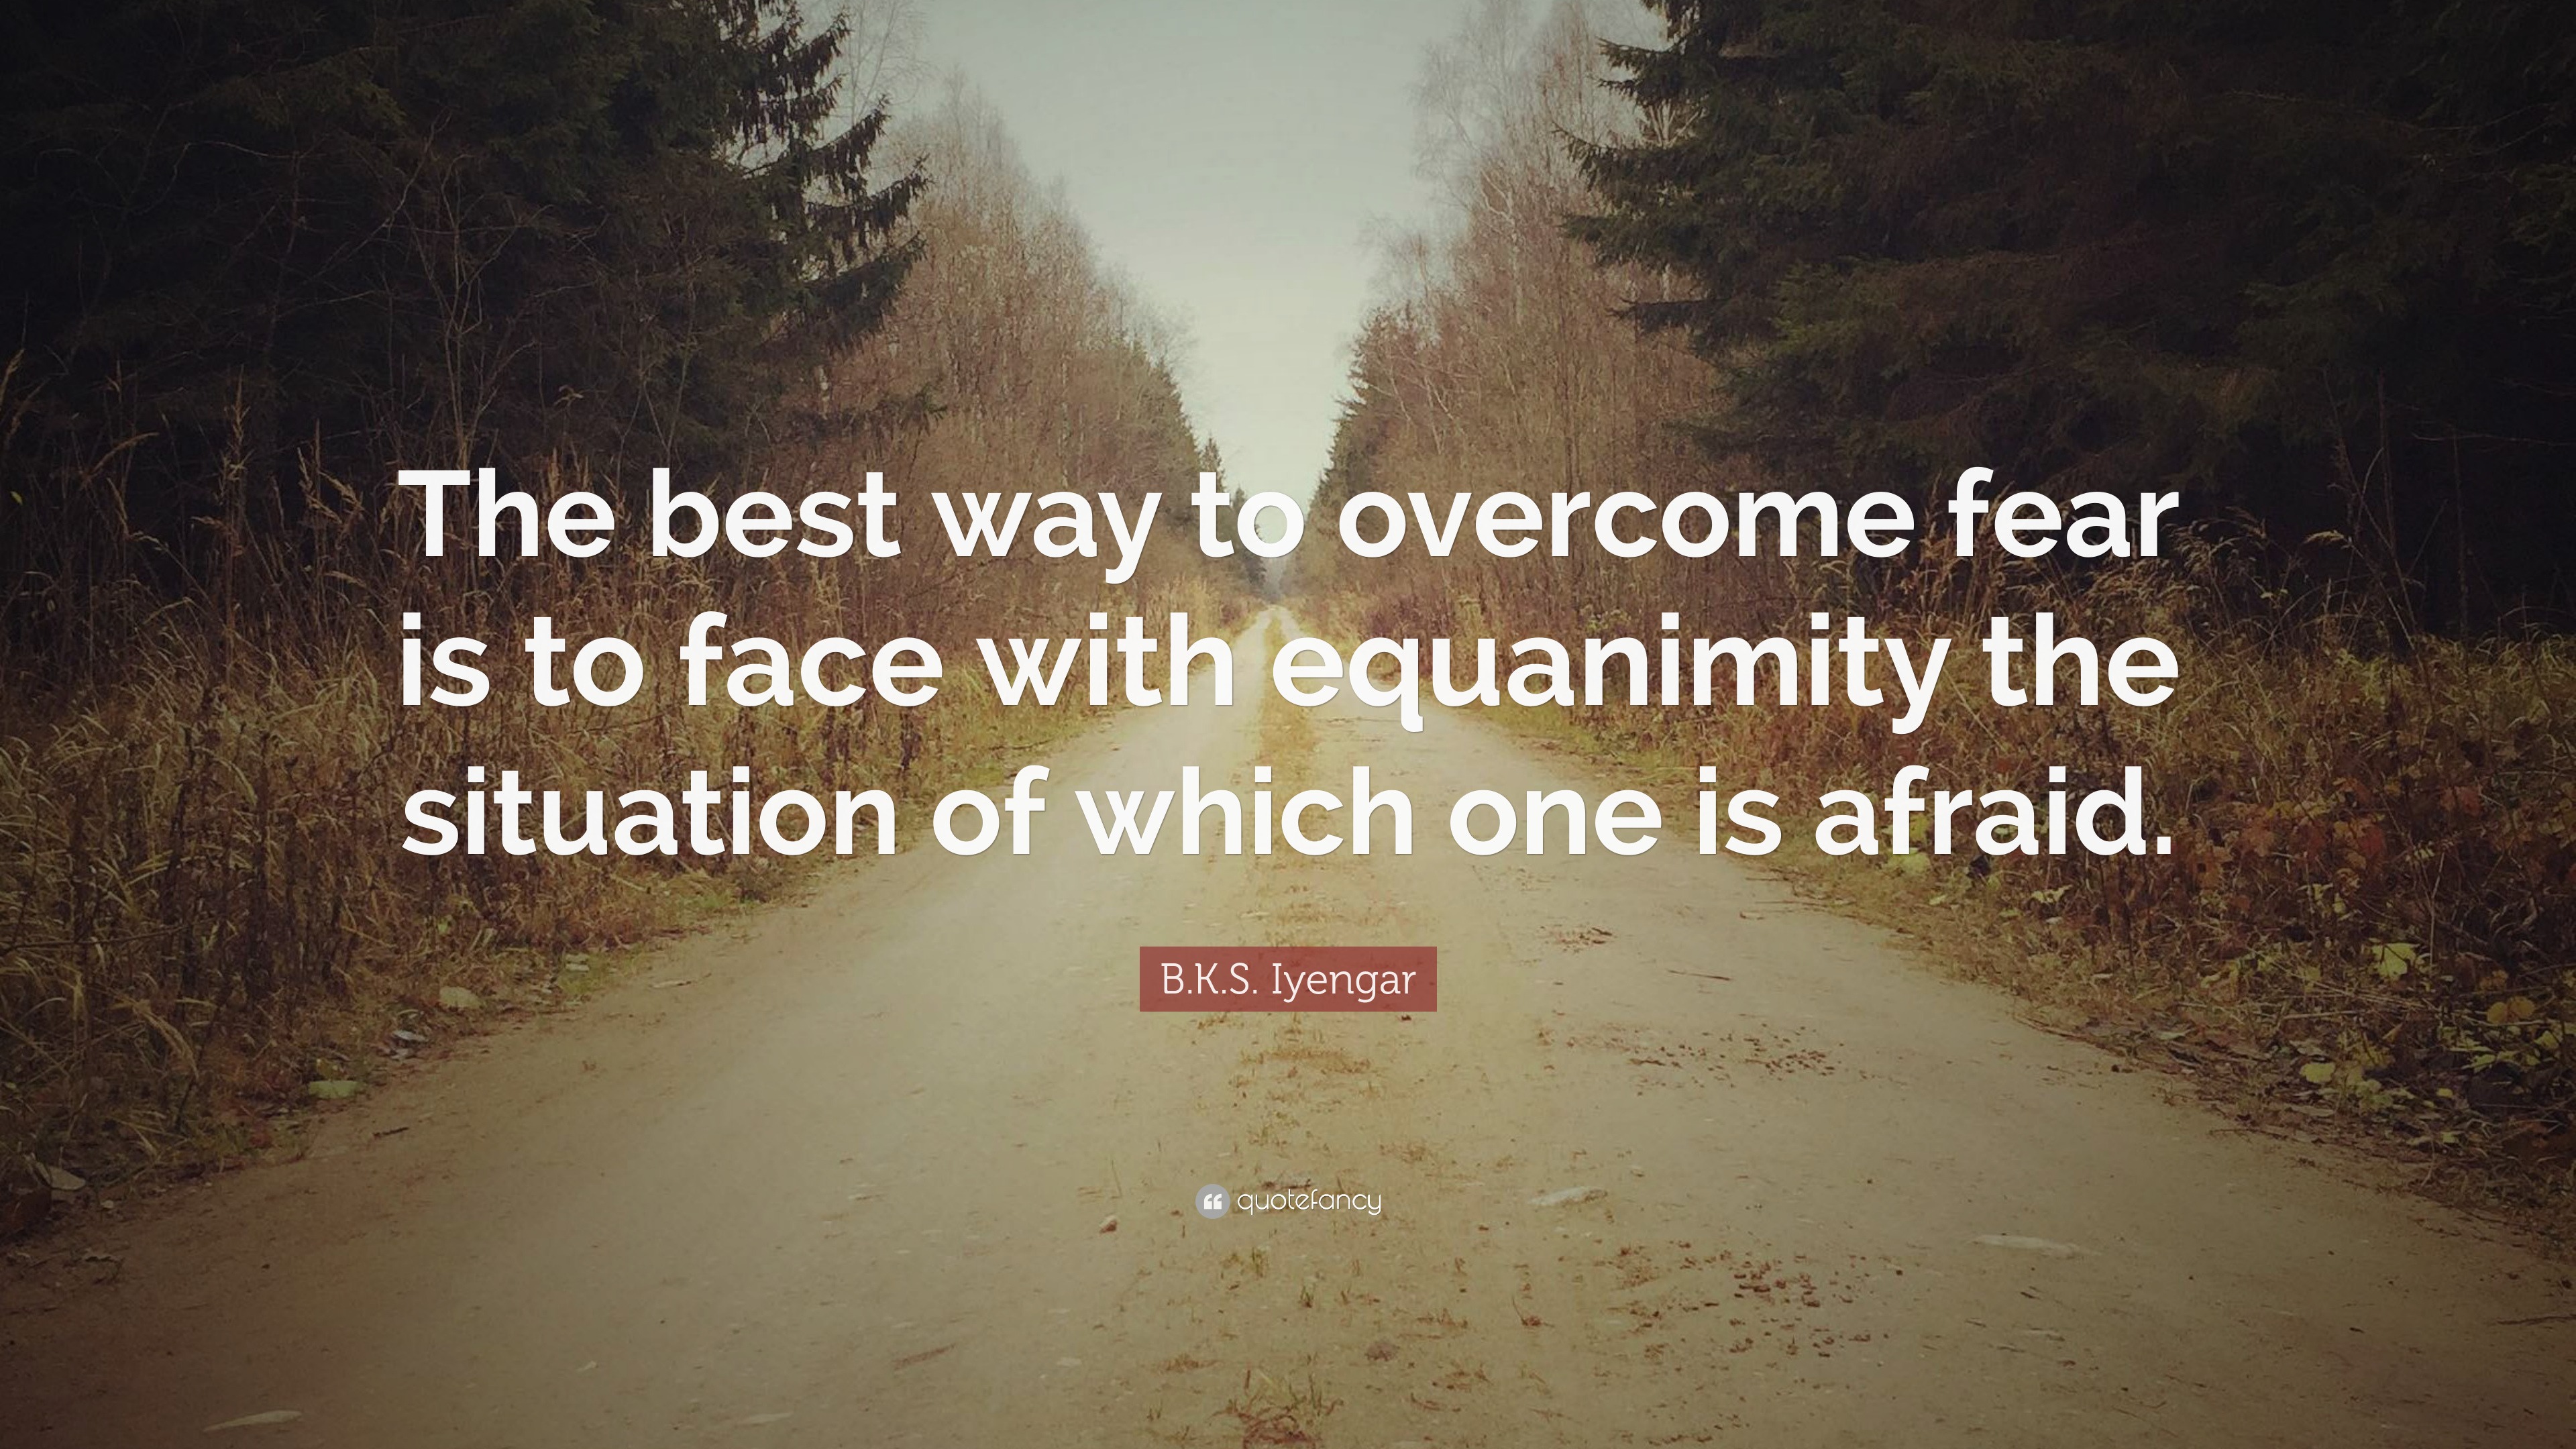 B.K.S. Iyengar Quote: “The best way to overcome fear is to face with ...